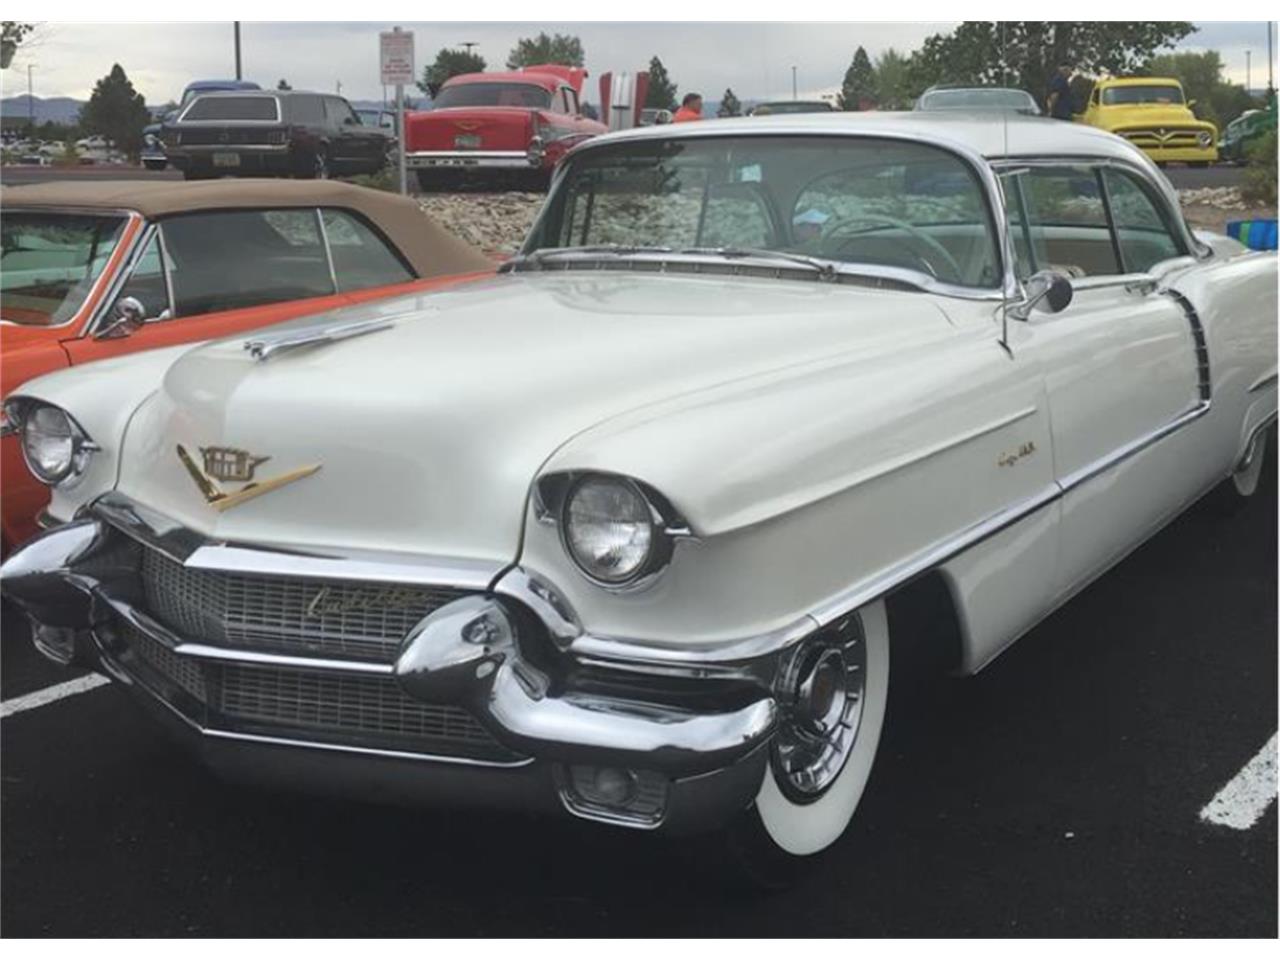 1956 cadillac coupe deville for sale classiccars com cc 1215209 1956 cadillac coupe deville for sale